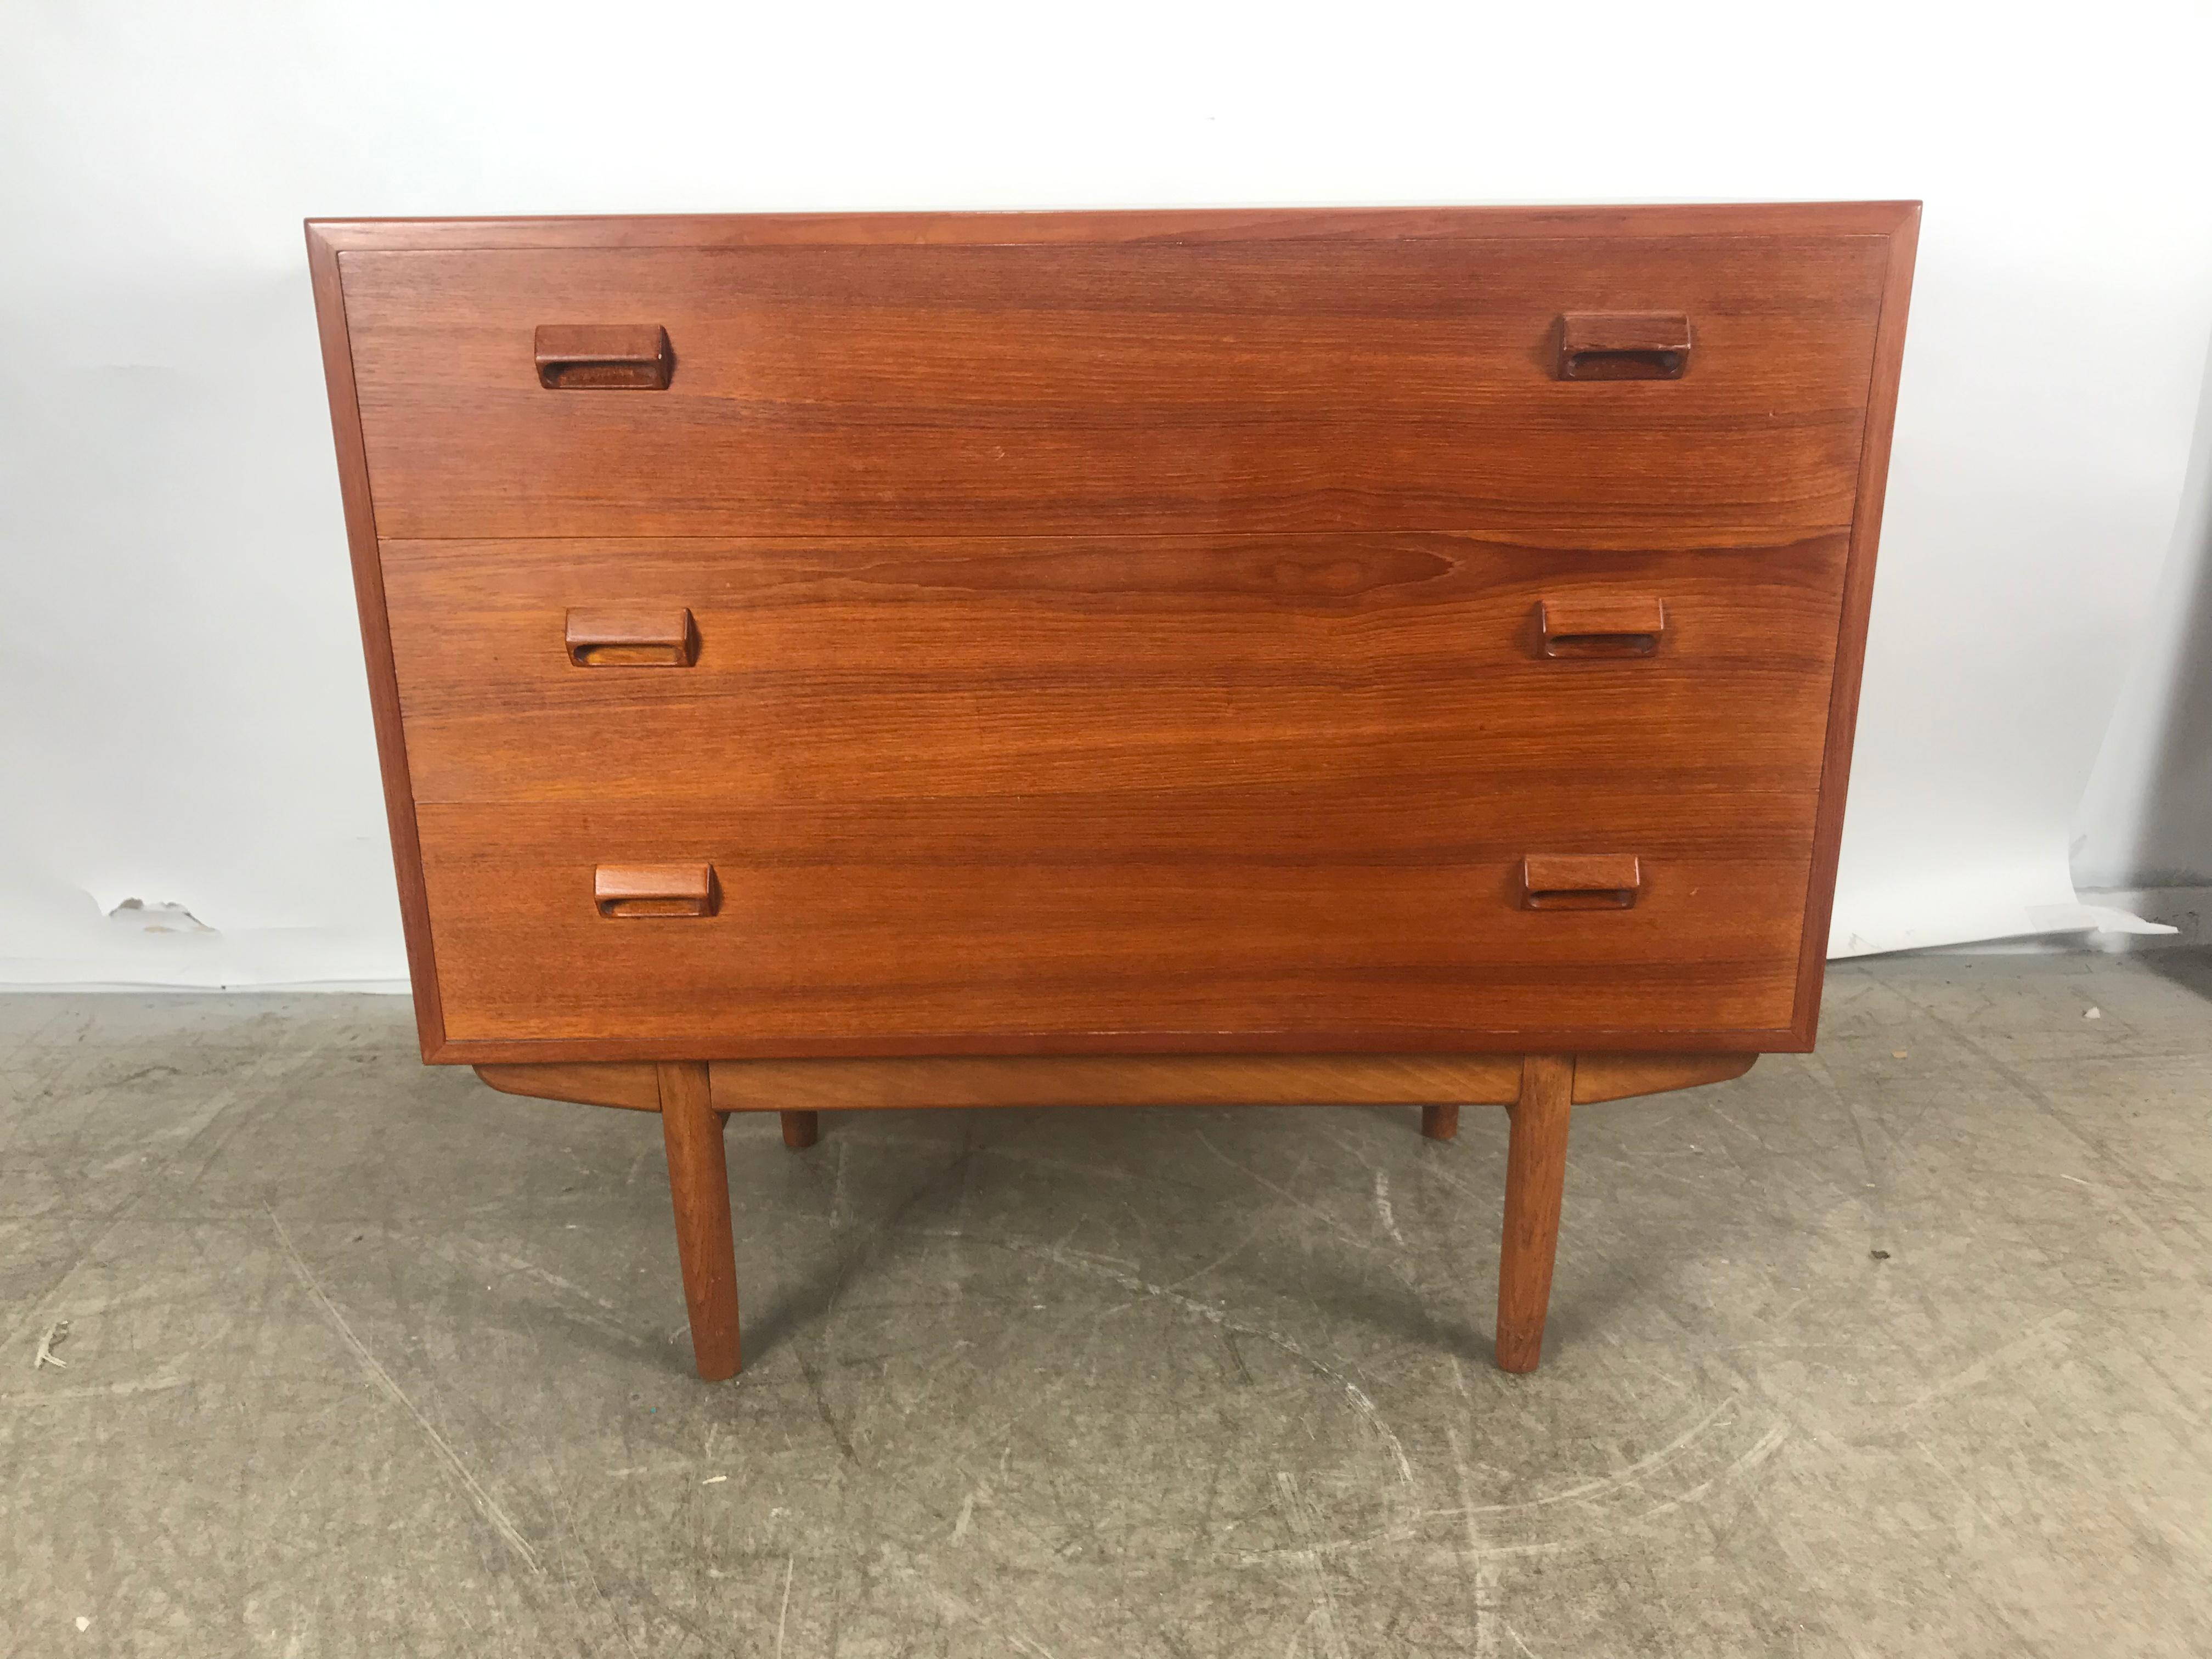 Classic teak dresser desk or vanity designed by Børge Mogensen, Made in Denmark. Featuring two generous size drawers, top drawer revealing desk (drop down drawer front) with mail slots and small drawer, cubbies and surprise pull out mirror. Truly